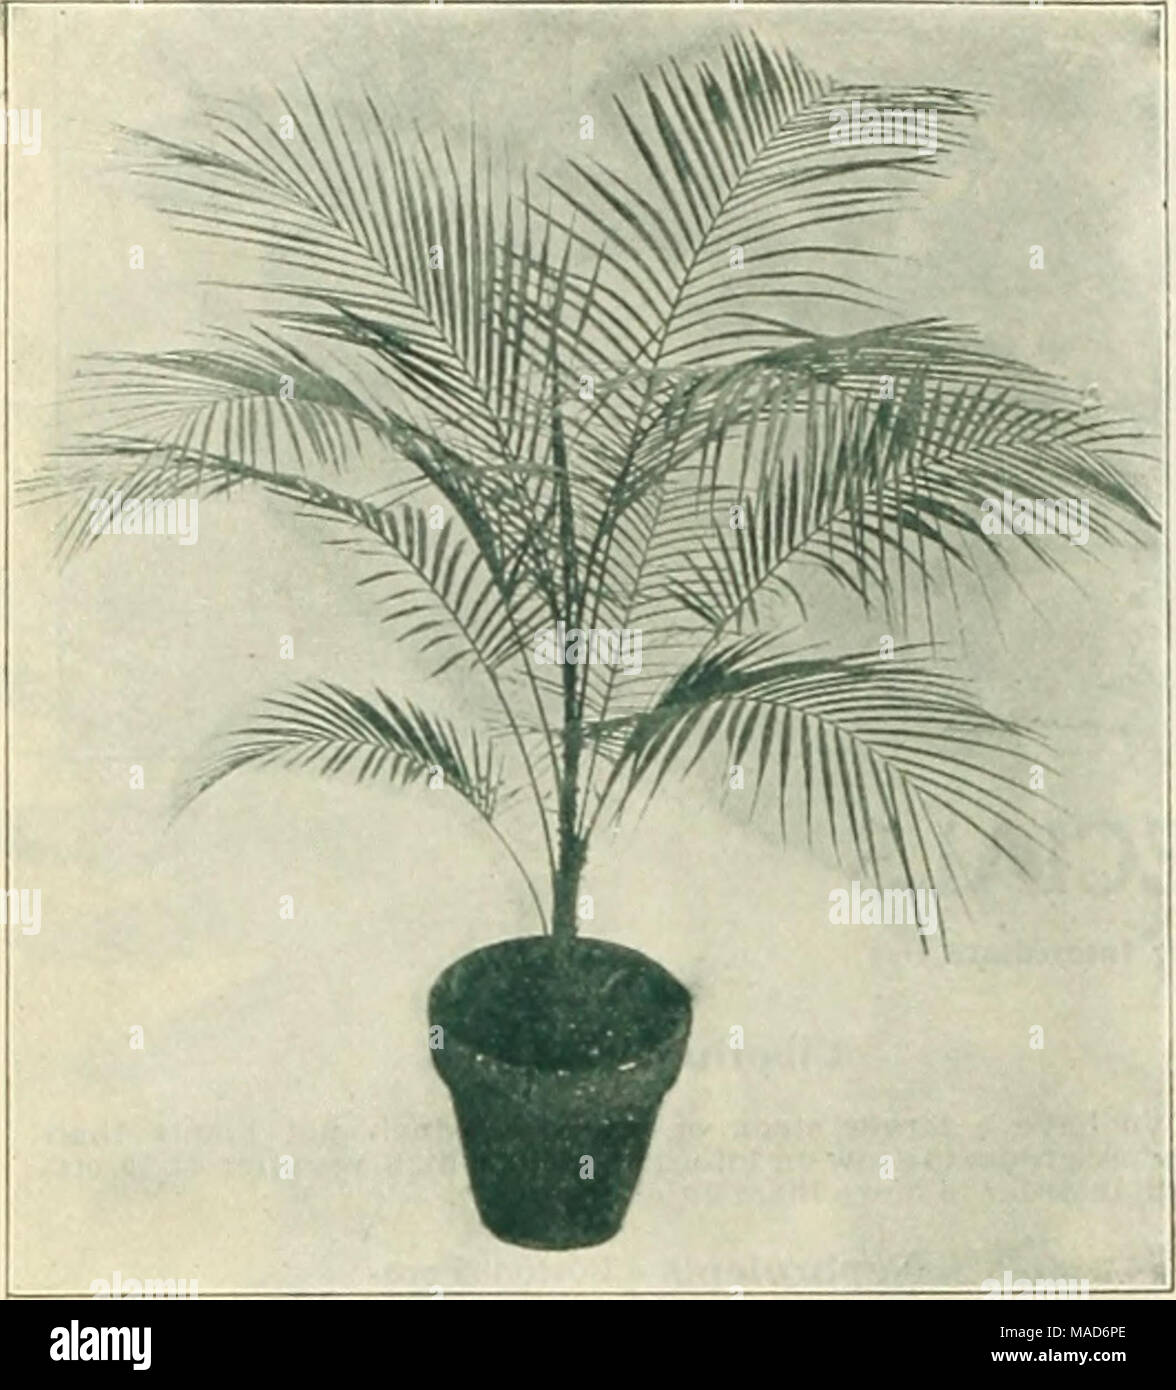 . Dreer's seasonable specialties for florists including flower seeds, bulbs decorative plants for Easter hardy plants, et. etc . Kentia ForsterianaâMade-up Plants. COCOS WEDDELIANA Areca Lutescens. A nice lot of 3-inch pots. 3 plants in a pot. 12 to 15 inches hiirh, $1.25 per doz.; tlO.OO per 100. Cocos Weddeliana. We have nearly an acre of elass devoted to this most trraceful ol all Palms. Splendid, thrifty stock, of rich dark color. 2-inch pots. S to 6 inches hieb, $1.60 per doz.; $10.00 per 100. 3 â ' 8 to 10 &quot; &quot; 2.00 â &quot; 15.00 per 100. 5 &quot; 18 to 24 &quot; &quot; splendi Stock Photo